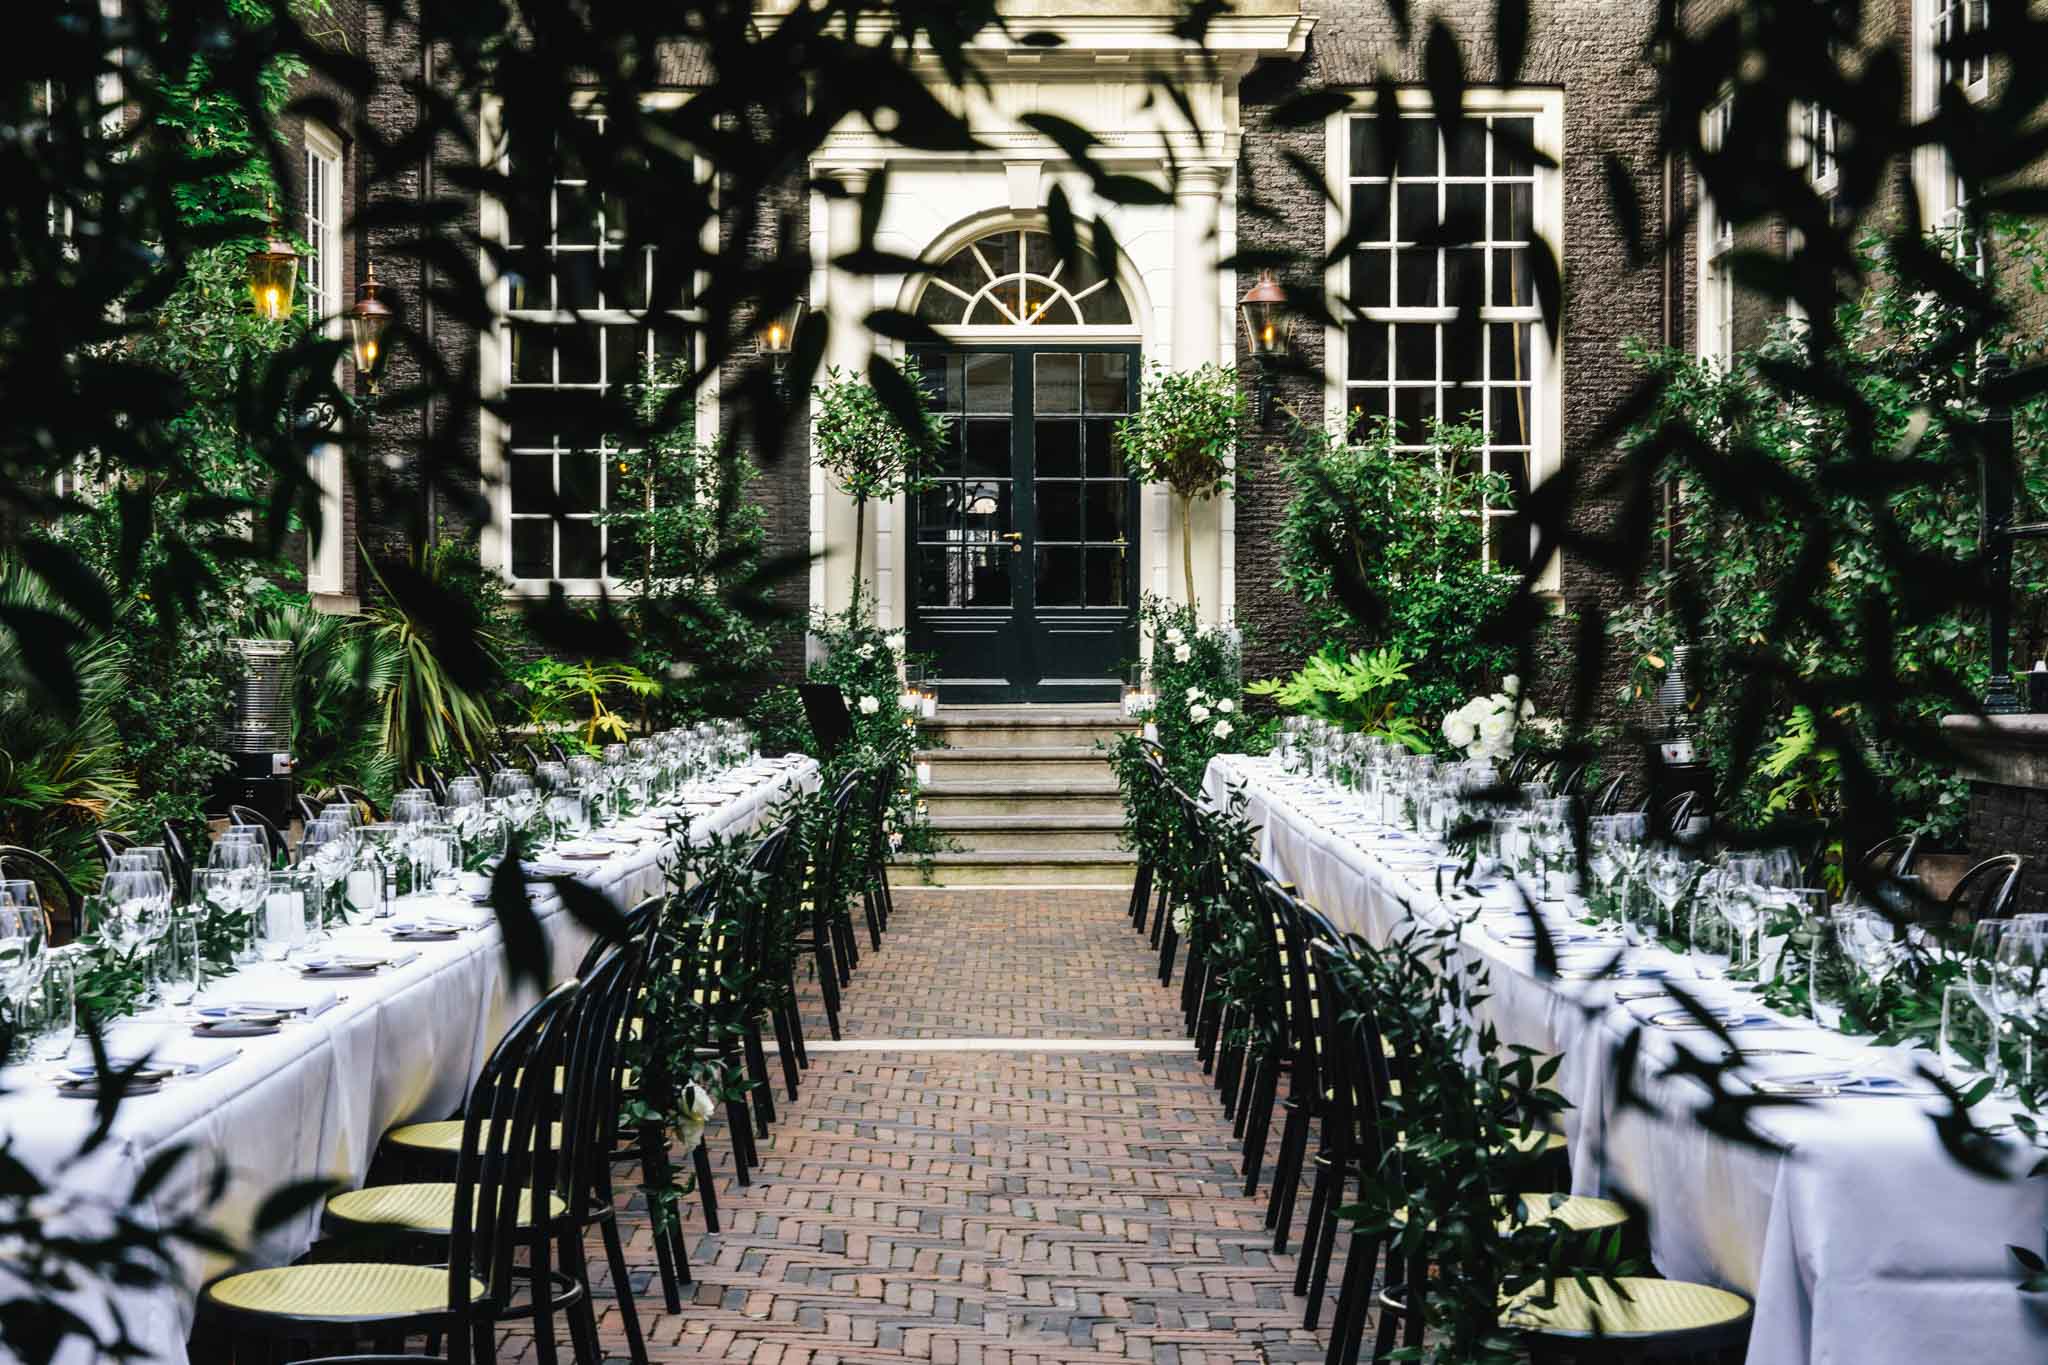 The secluded garden set for a dinner at a wedding at luxury boutique hotel The Dylan Amsterdam.